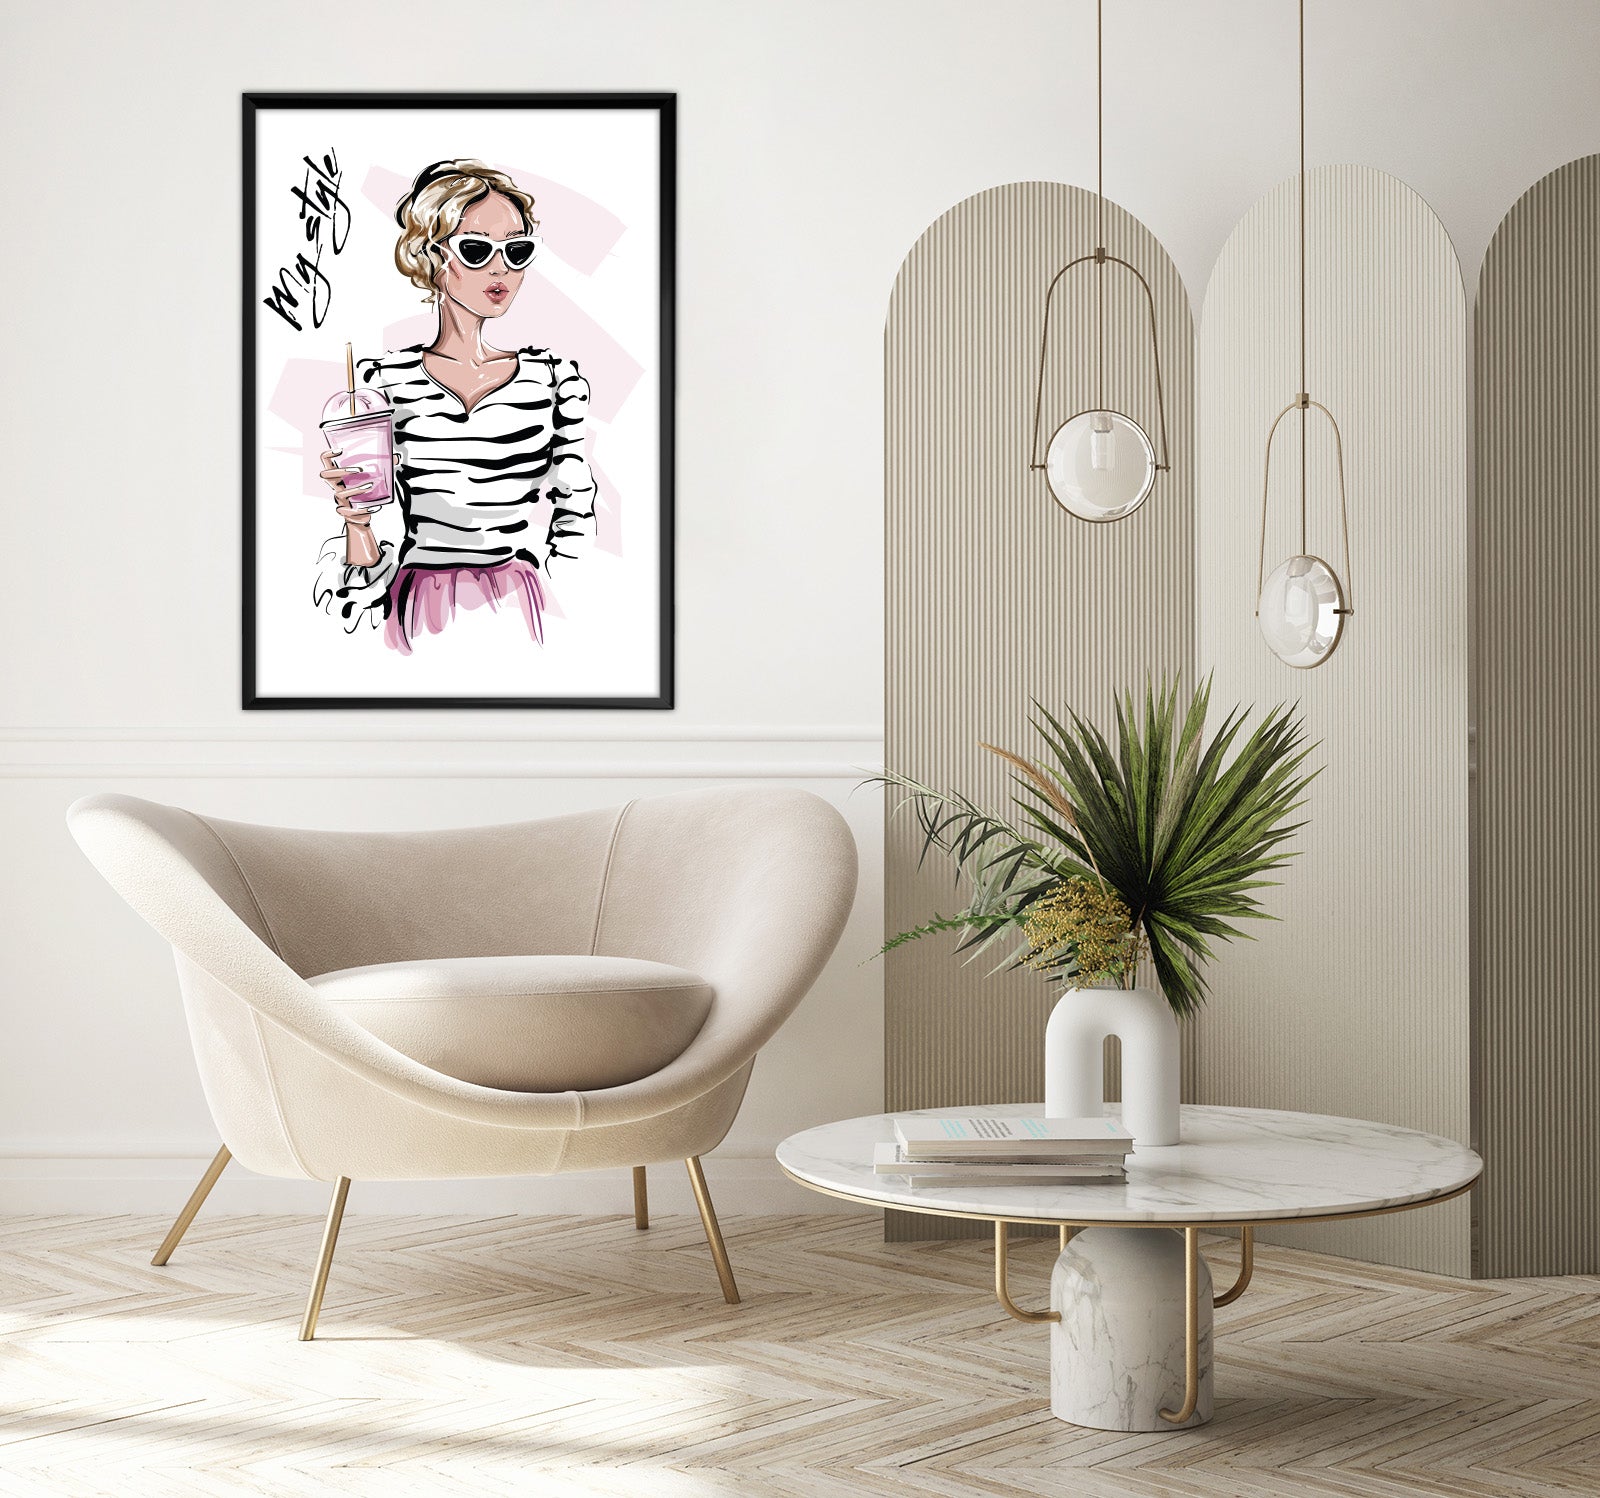 Wall Art for Living Room (a Girl Wearing a Shirt and Sunglasses)